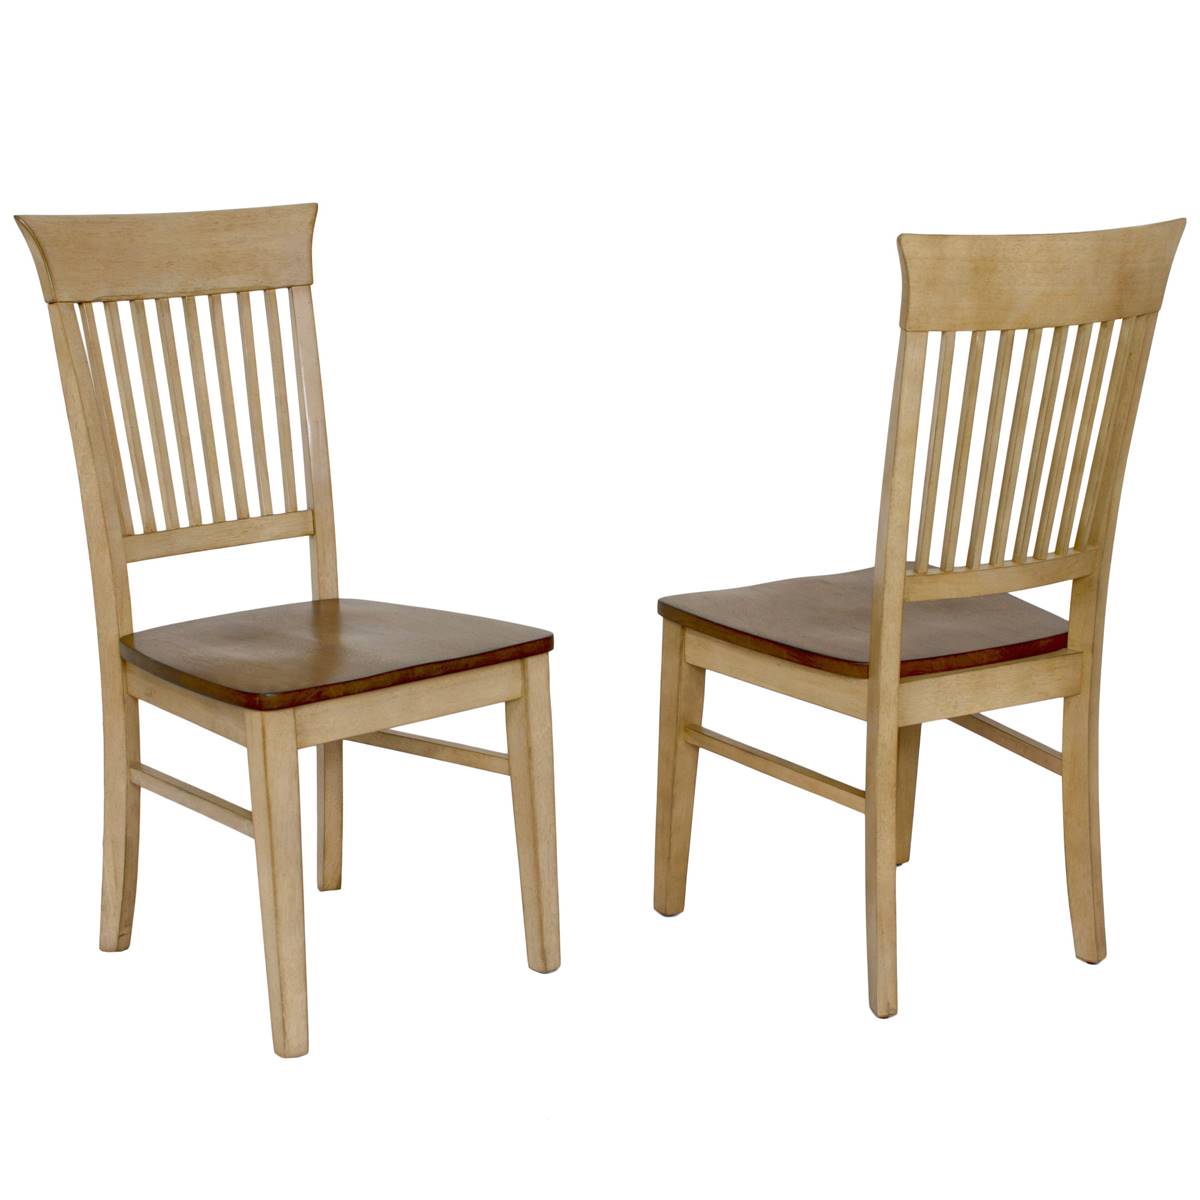 Besthom Simply Brook Distressed Side Chairs - Set Of 2